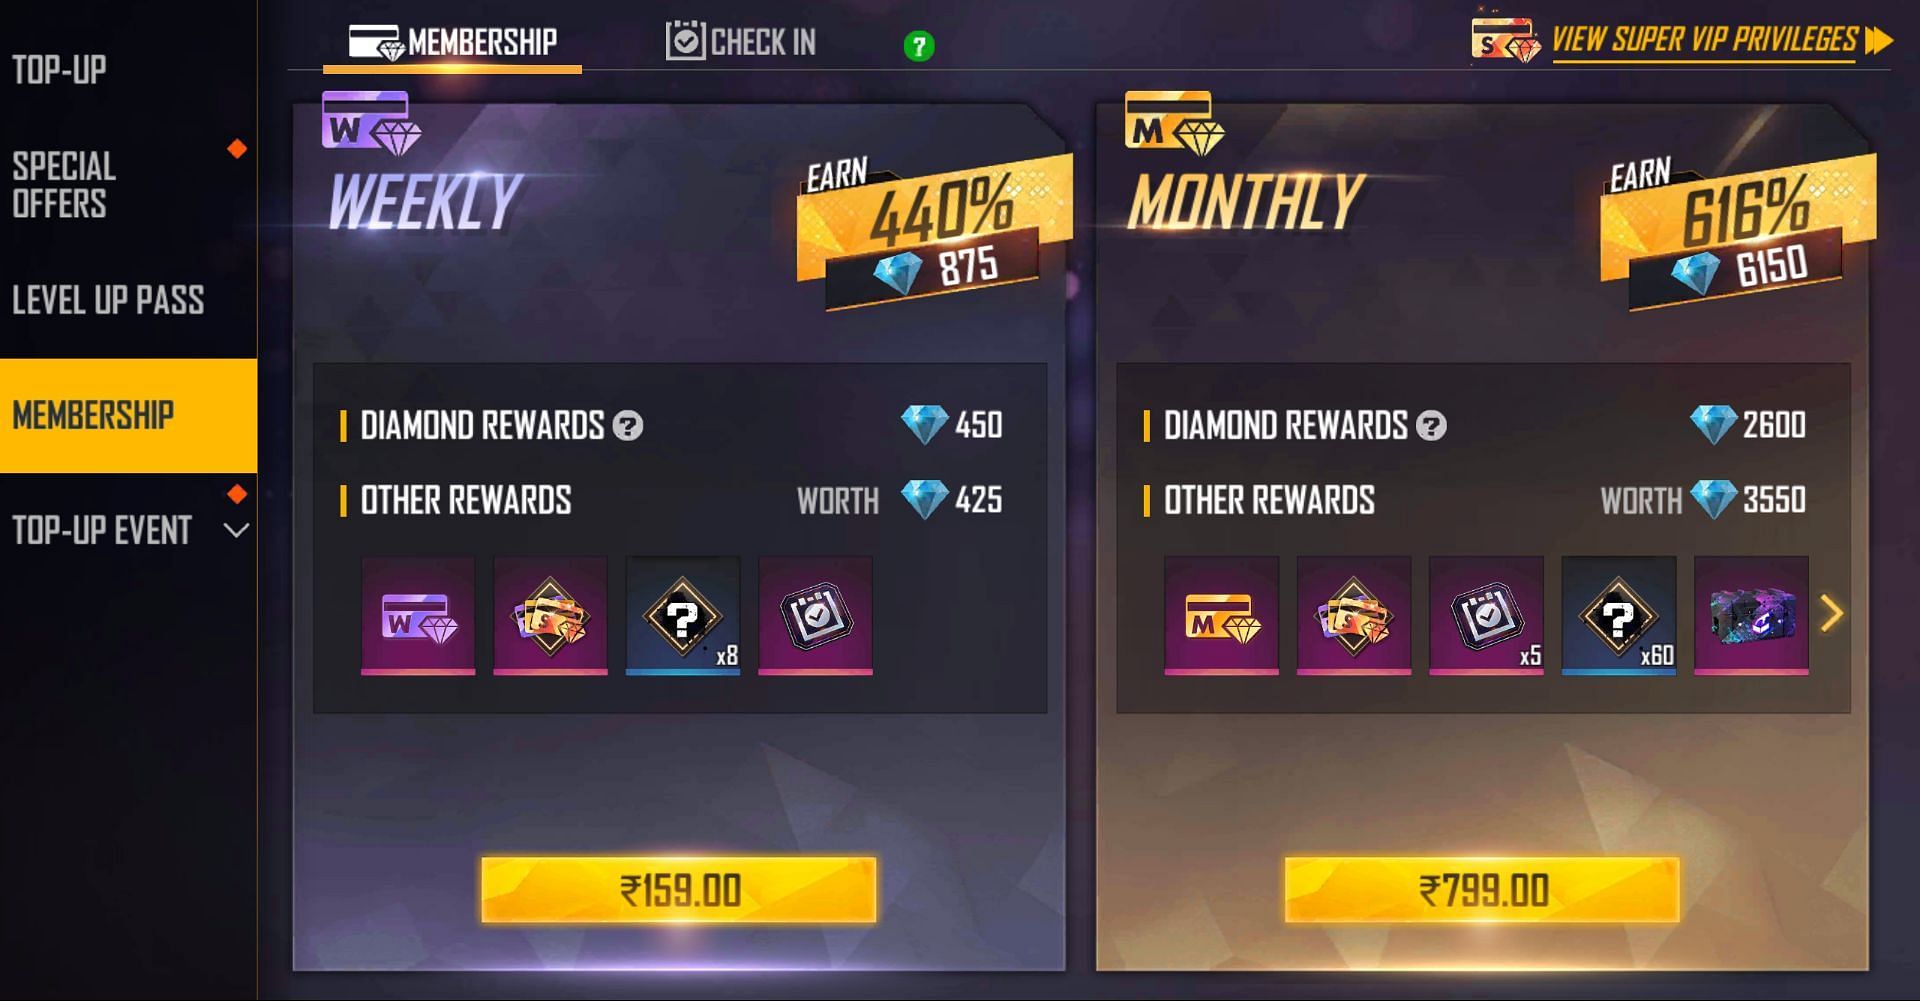 ₹159 is the price of the Weekly Membership (Image via Free Fire)